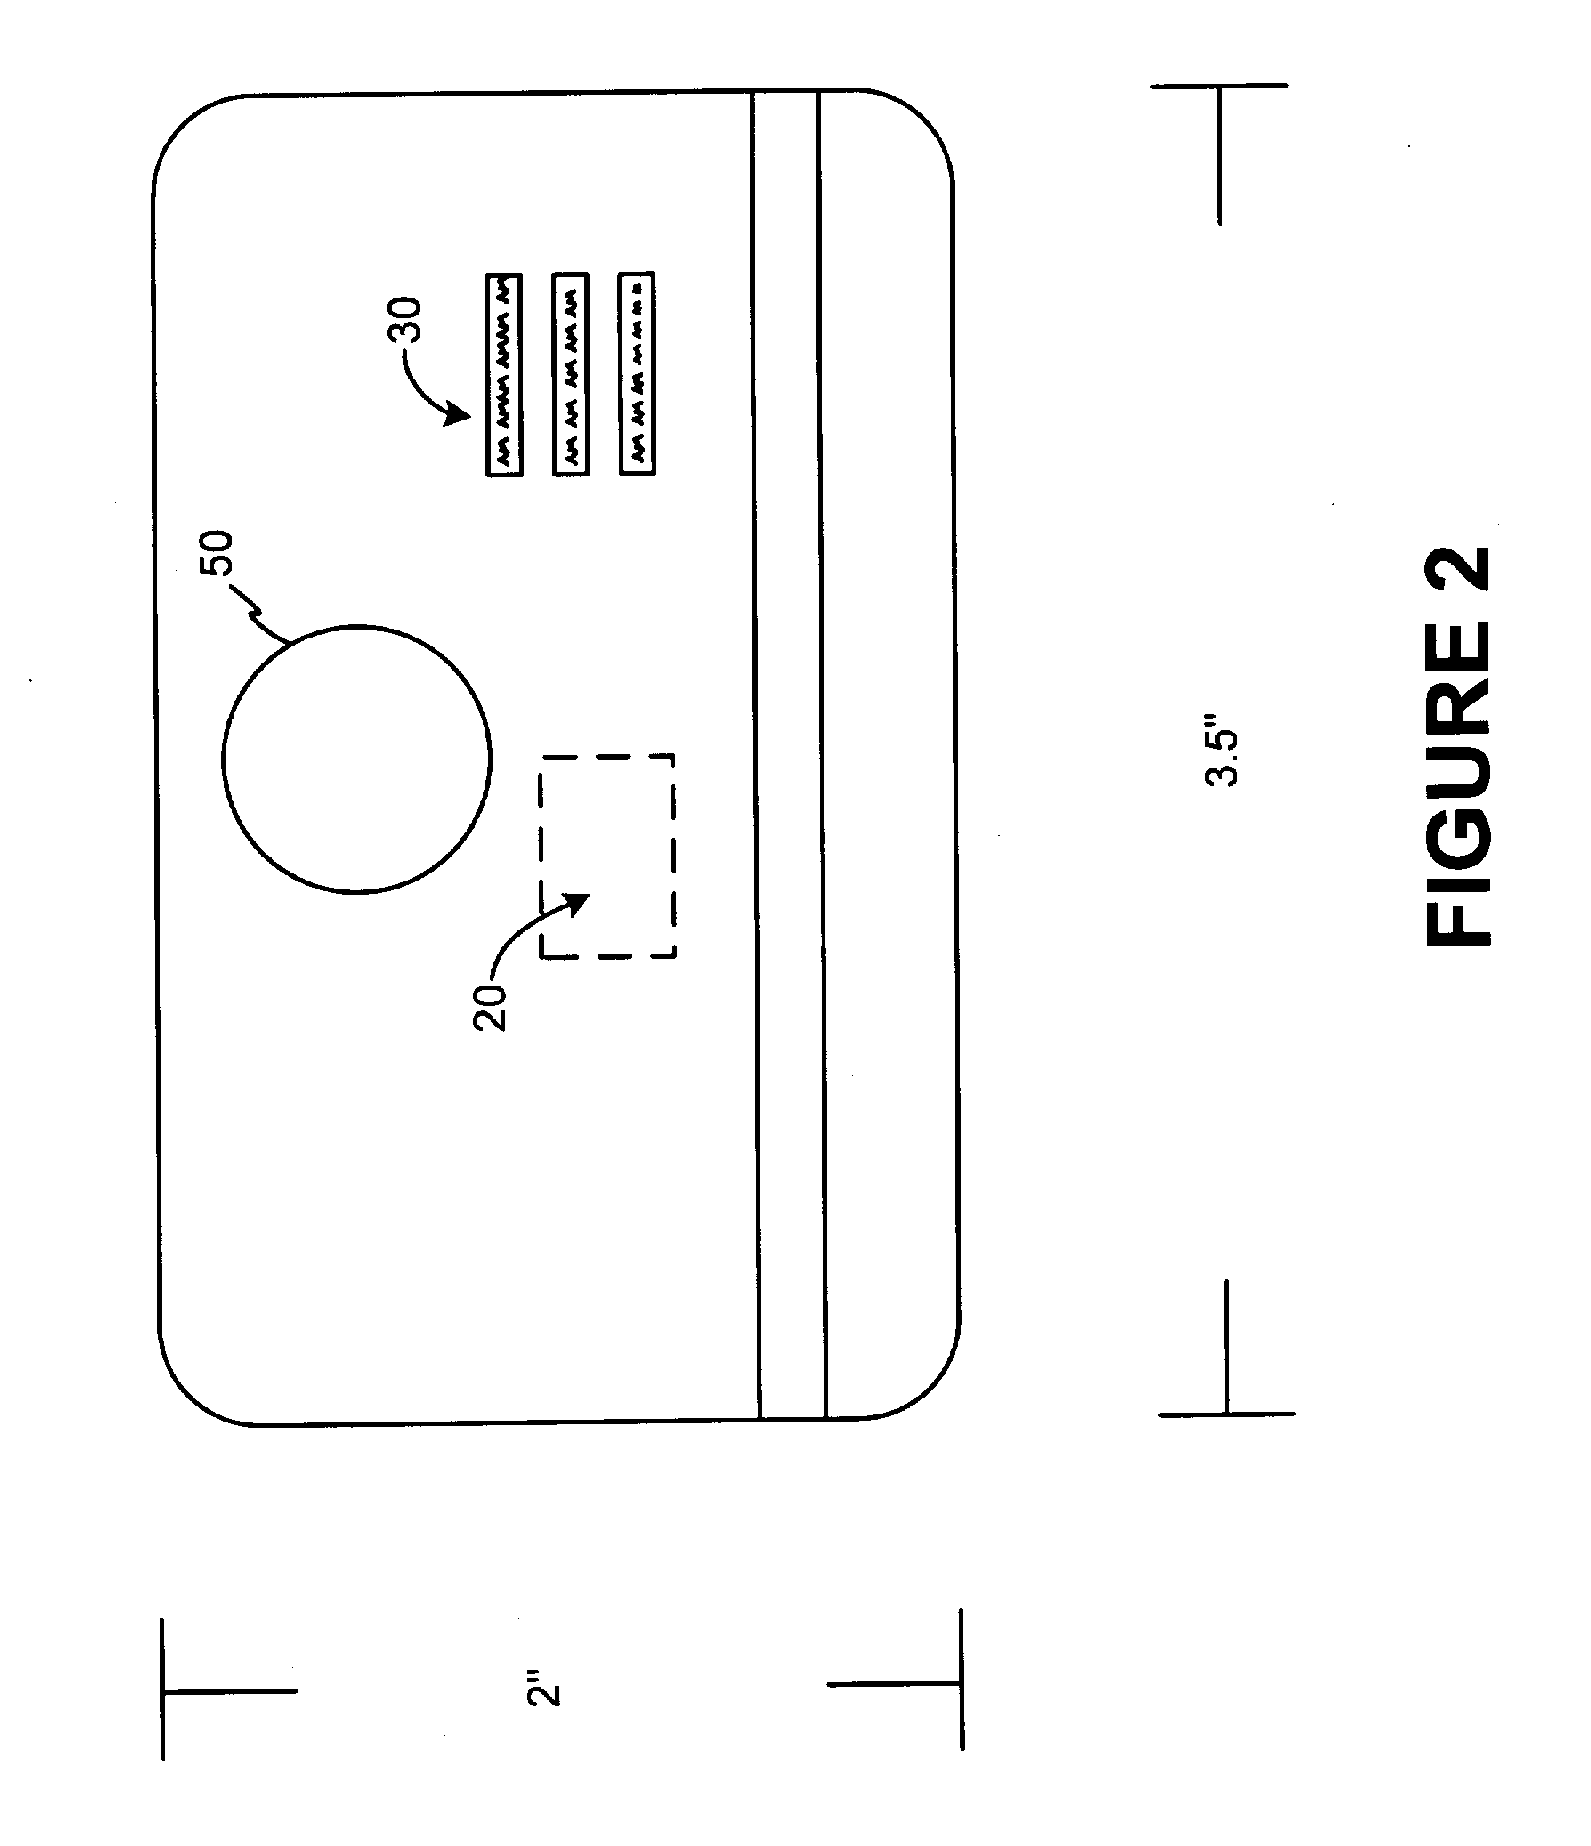 System and method for remotely initializing a RF transaction